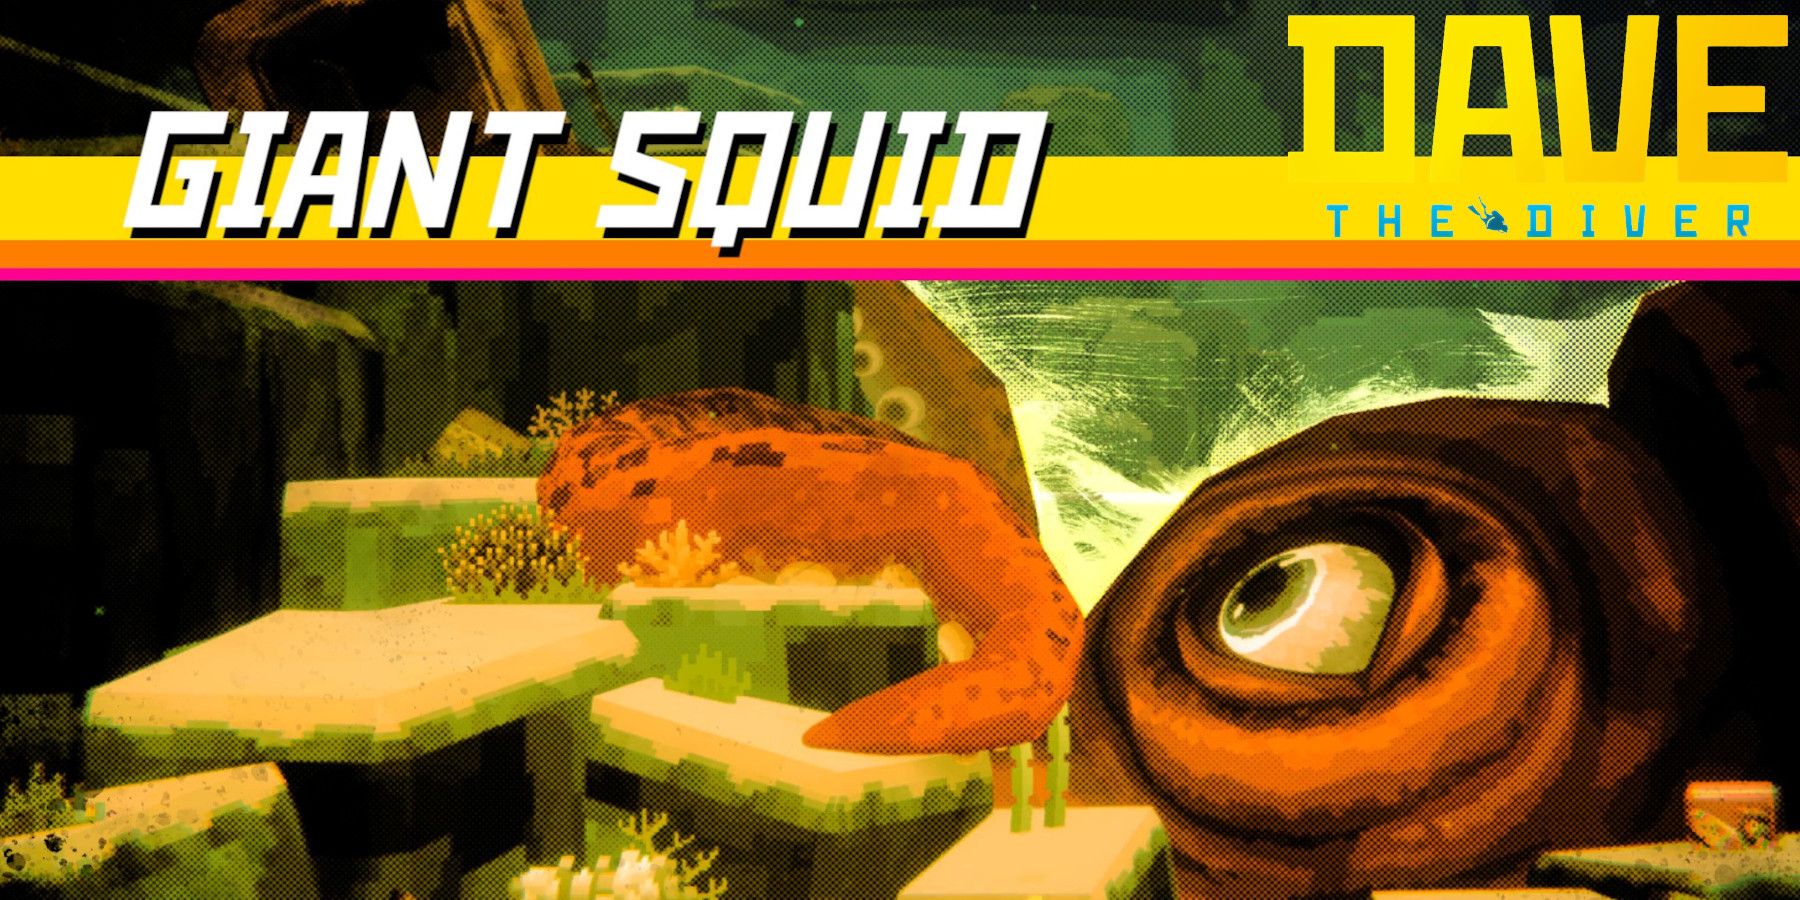 Dave-The-Diver-How-To-Defeat-Giant-Squid-01-1